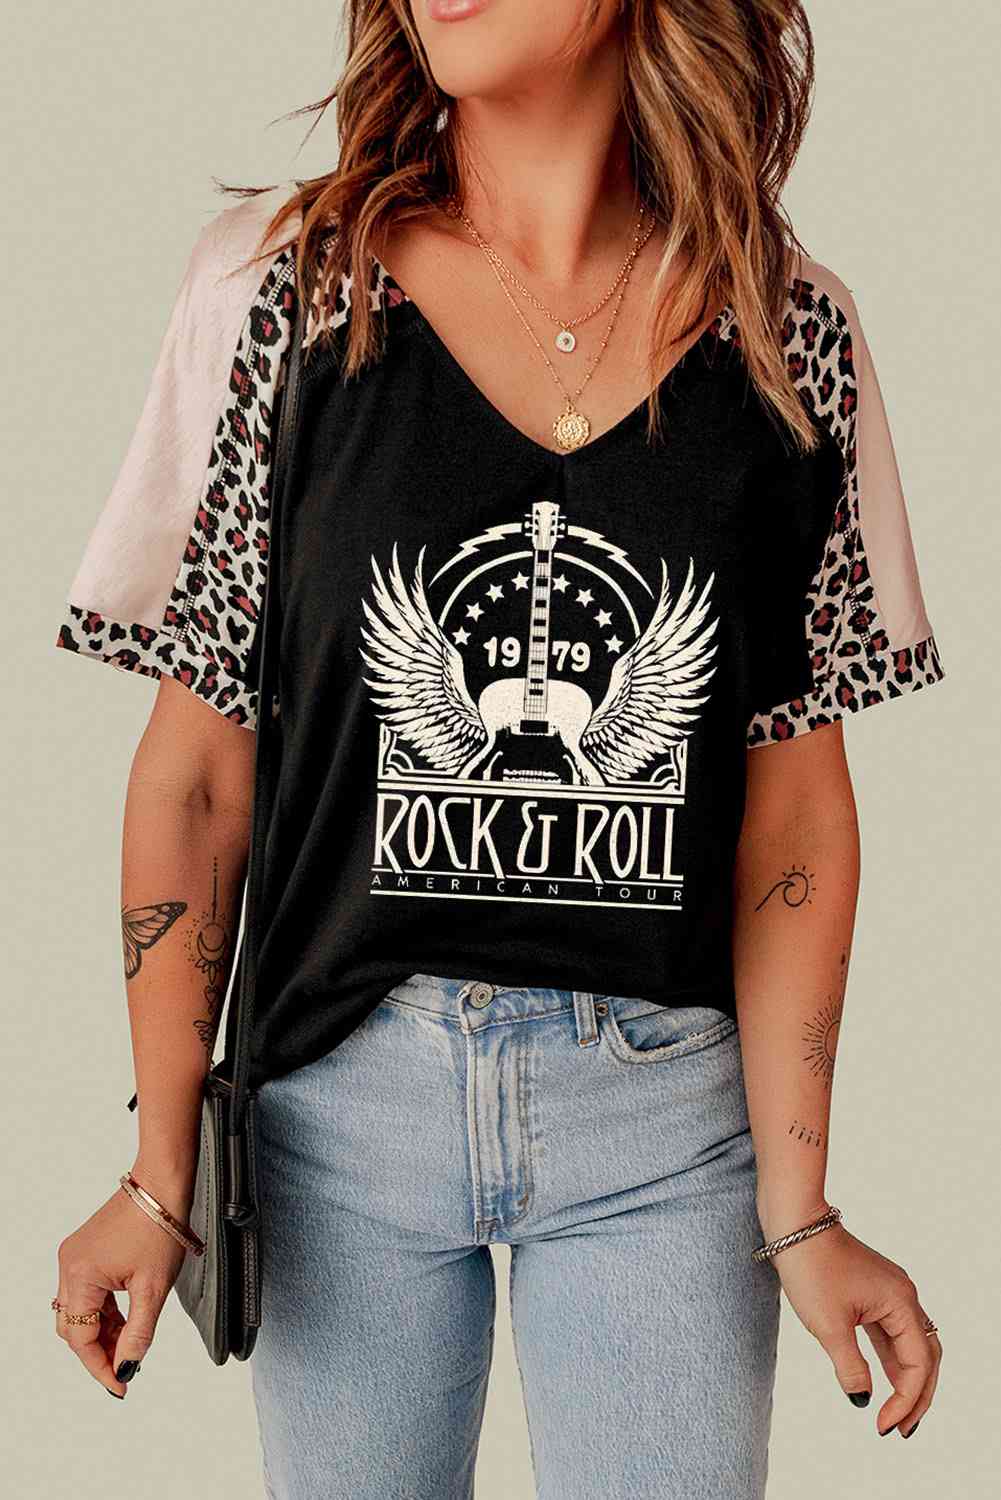 🎸 1979 ROCK & ROLL AMERICAN TOUR V-Neck Tee - Unleash Your Inner Rock Icon! 🌟🤘